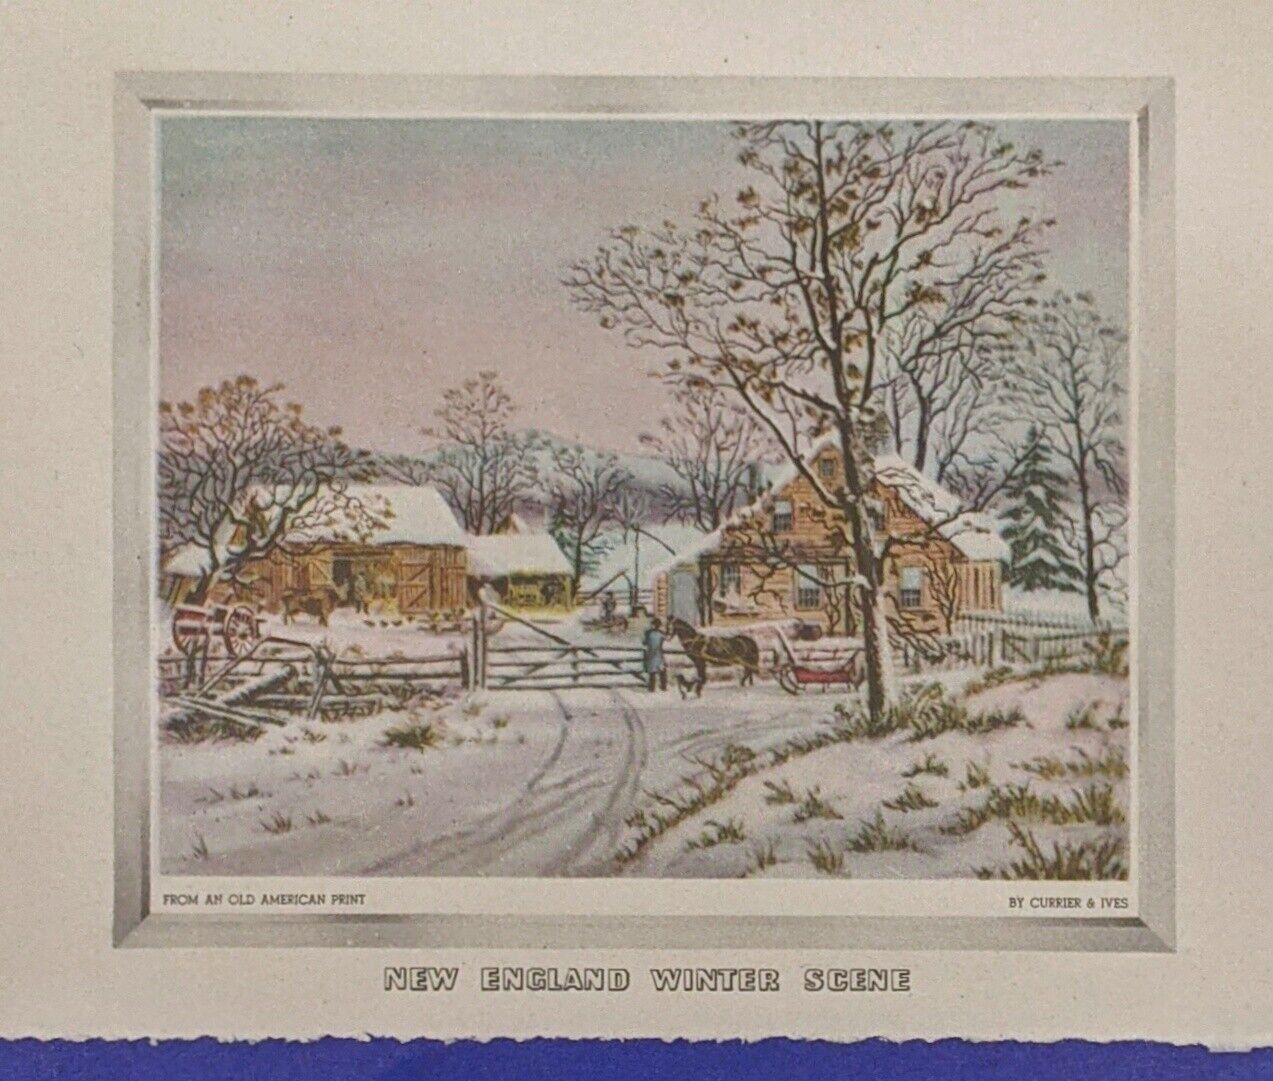 VTG Currier & Ives New England Winter Scene Christmas Card (Union Made Chicago)